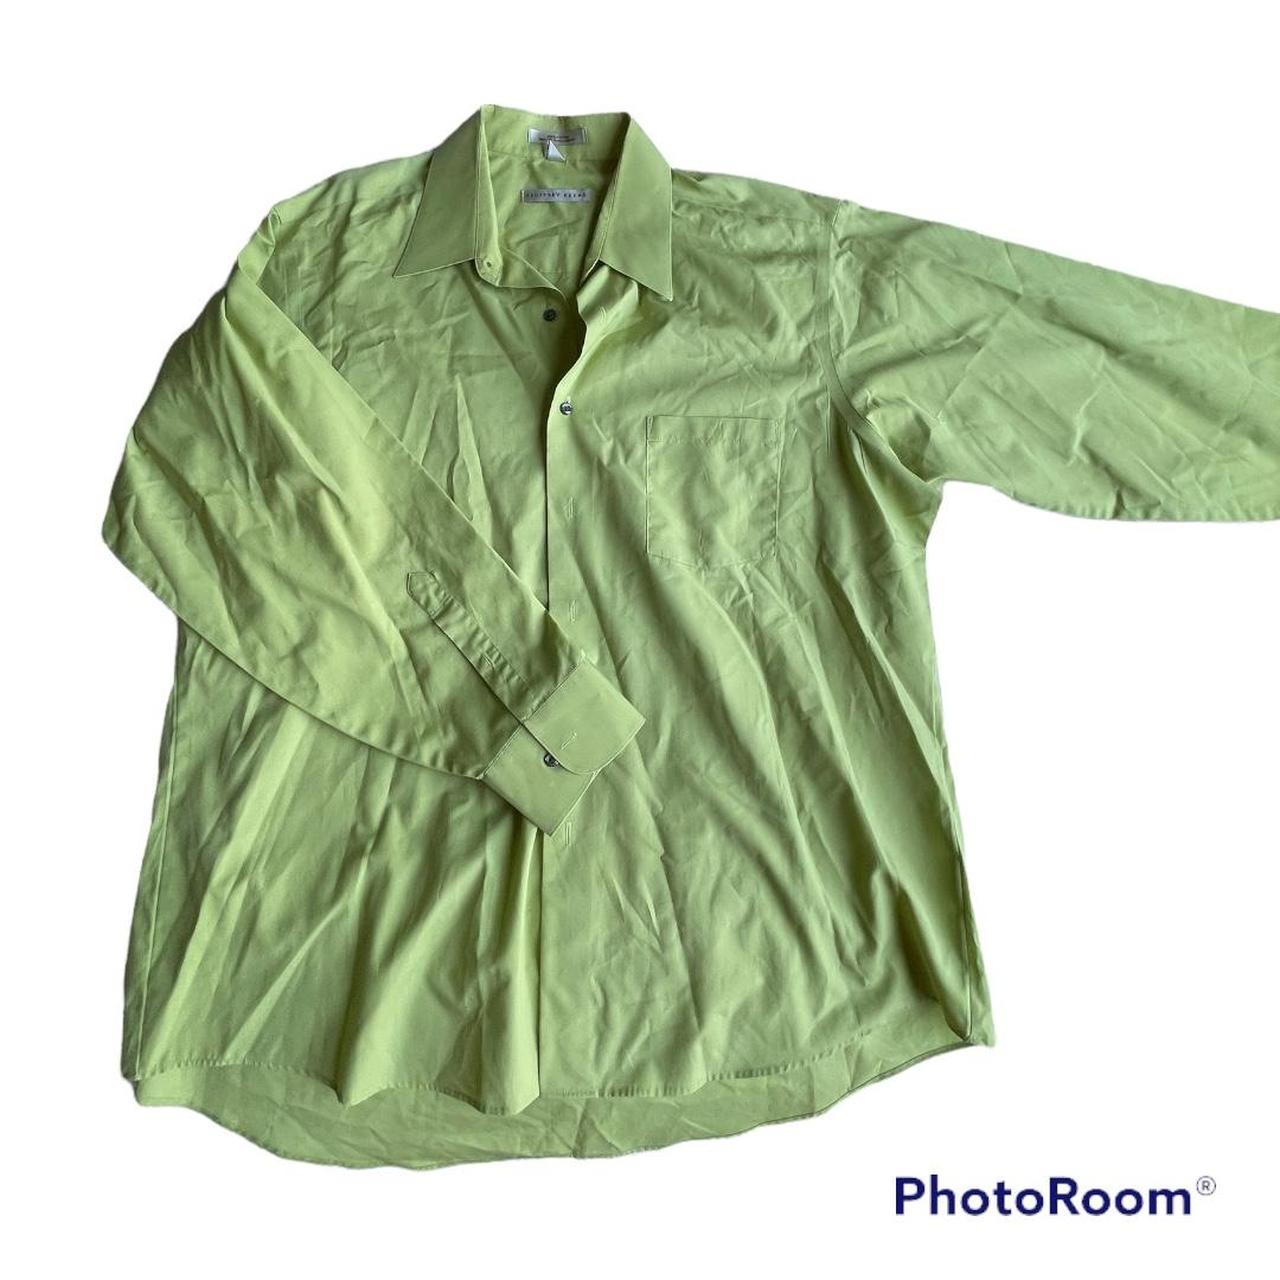 Product Image 2 - Men’s Lime Green Cotton Bright